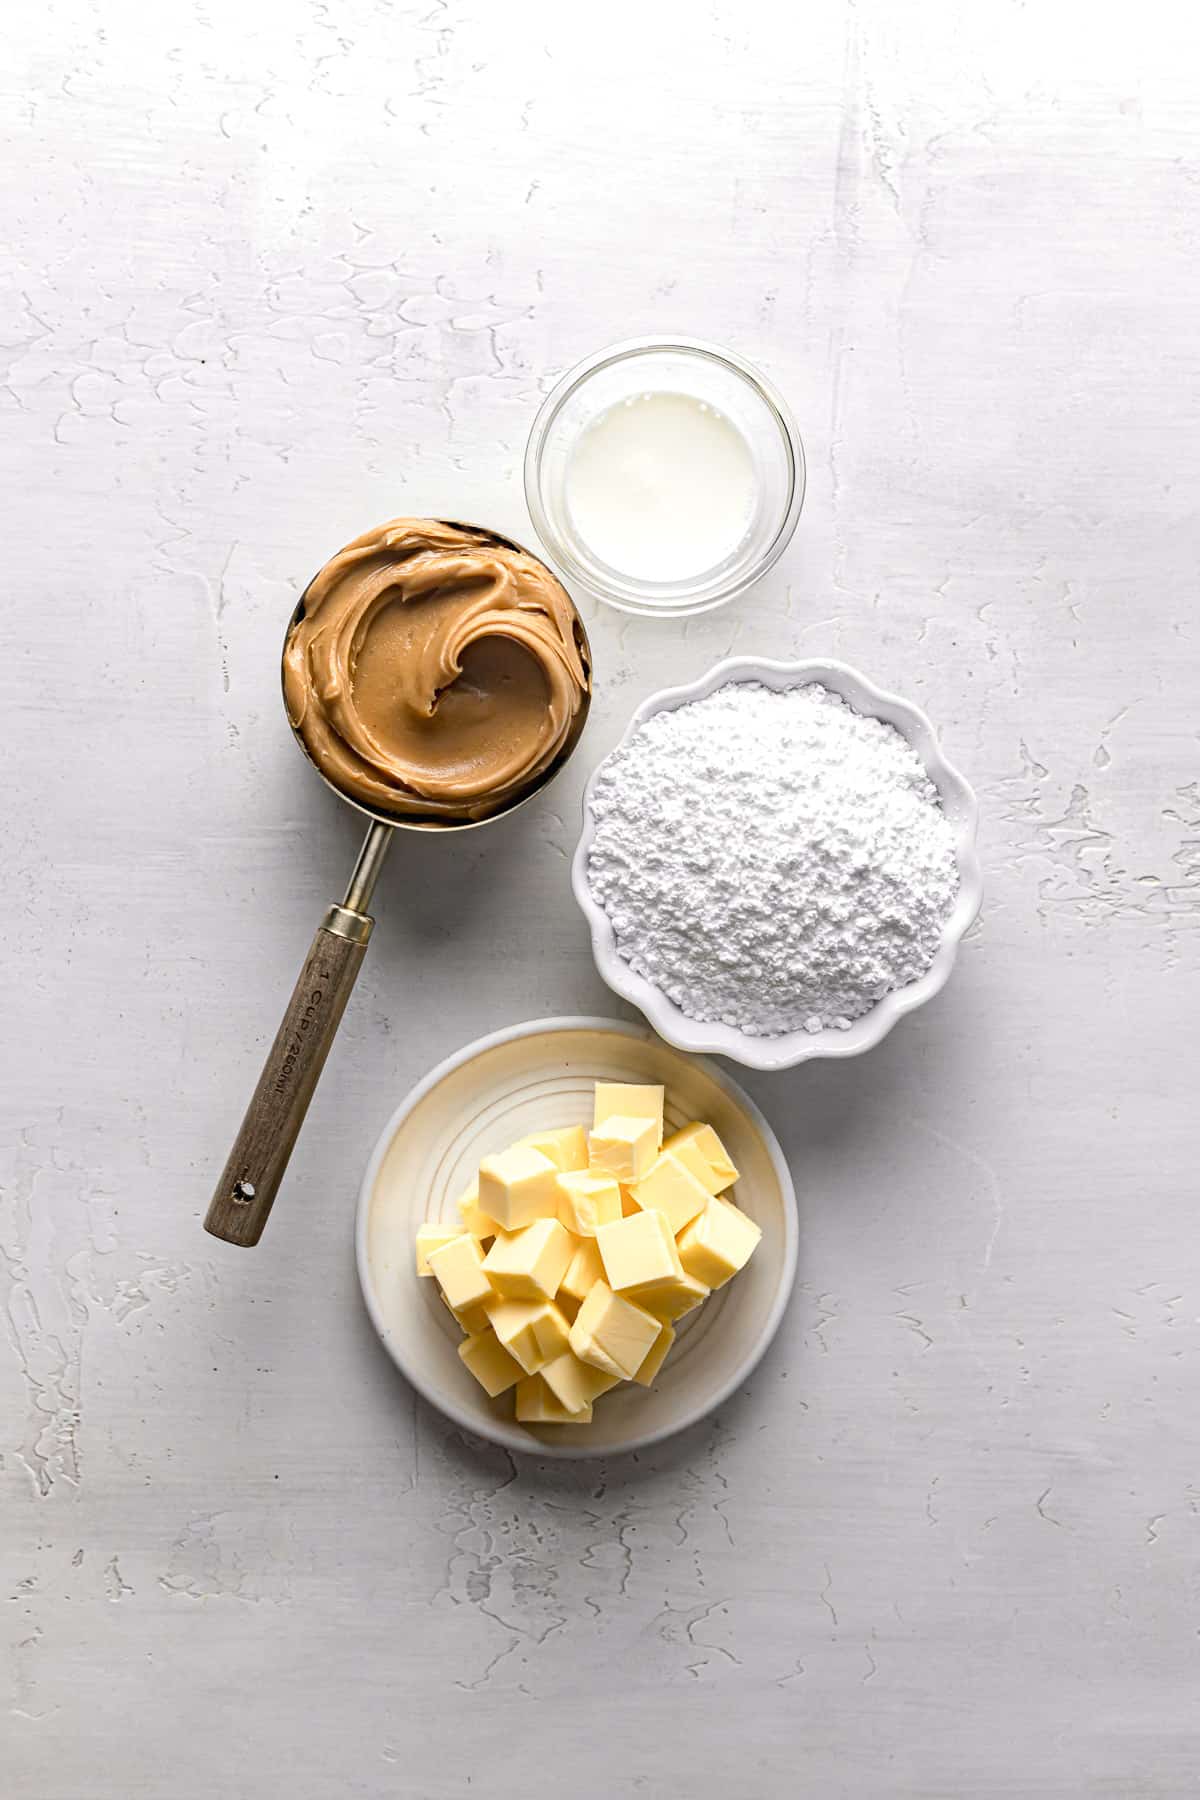 ingredients for peanut butter frosting.